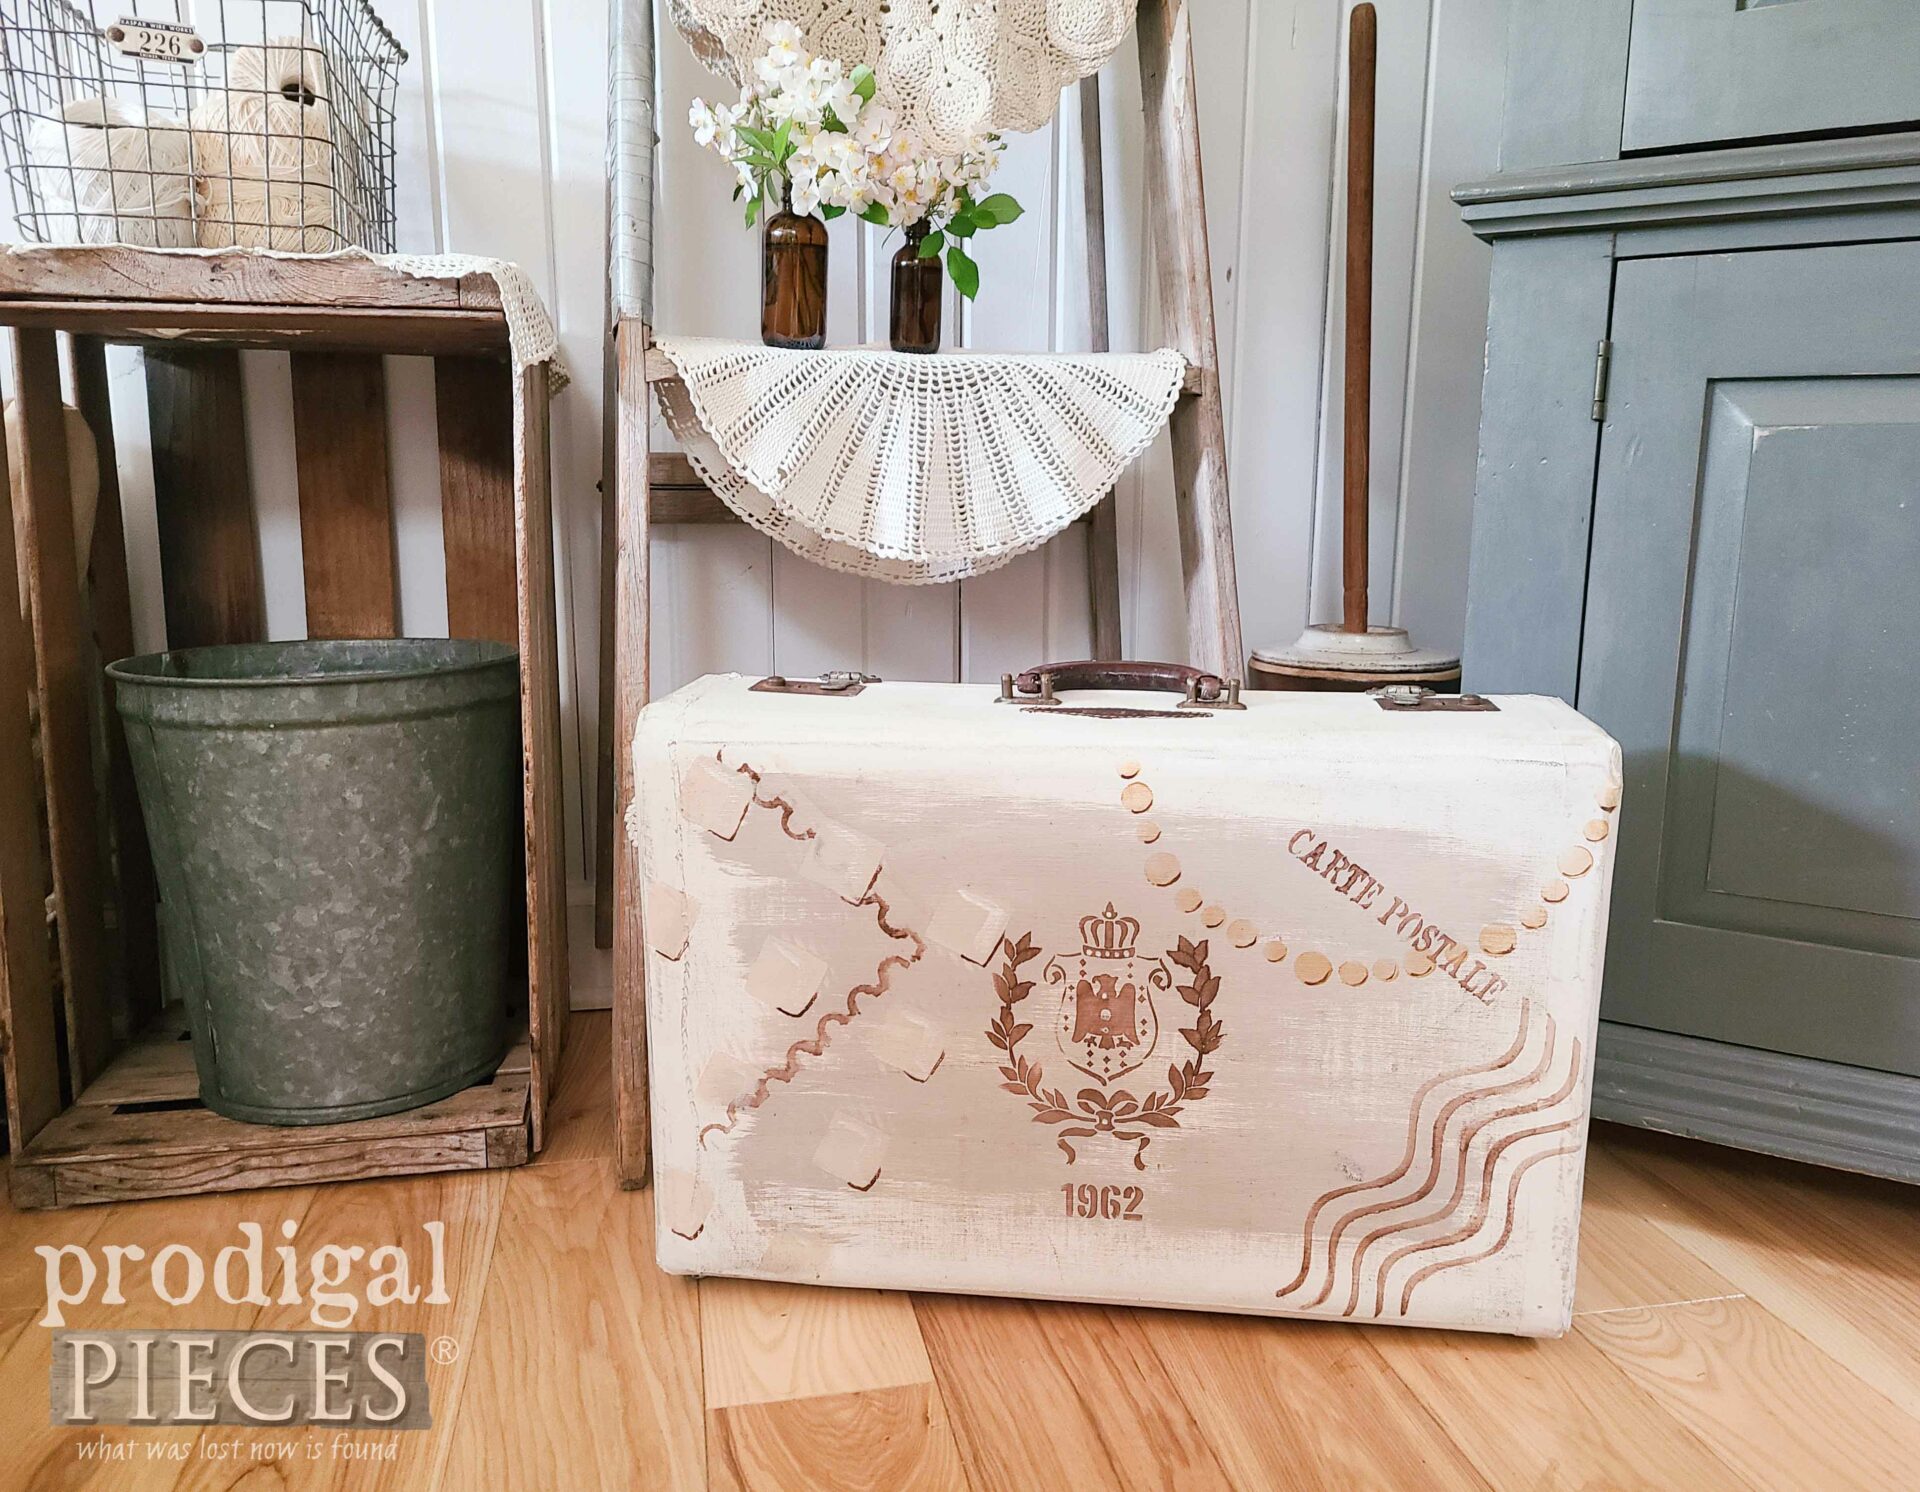 DIY French Chic Vintage Painted Luggage by Larissa of Prodigal Pieces | prodigalpieces.com #prodigalpieces #frenchchic #diy